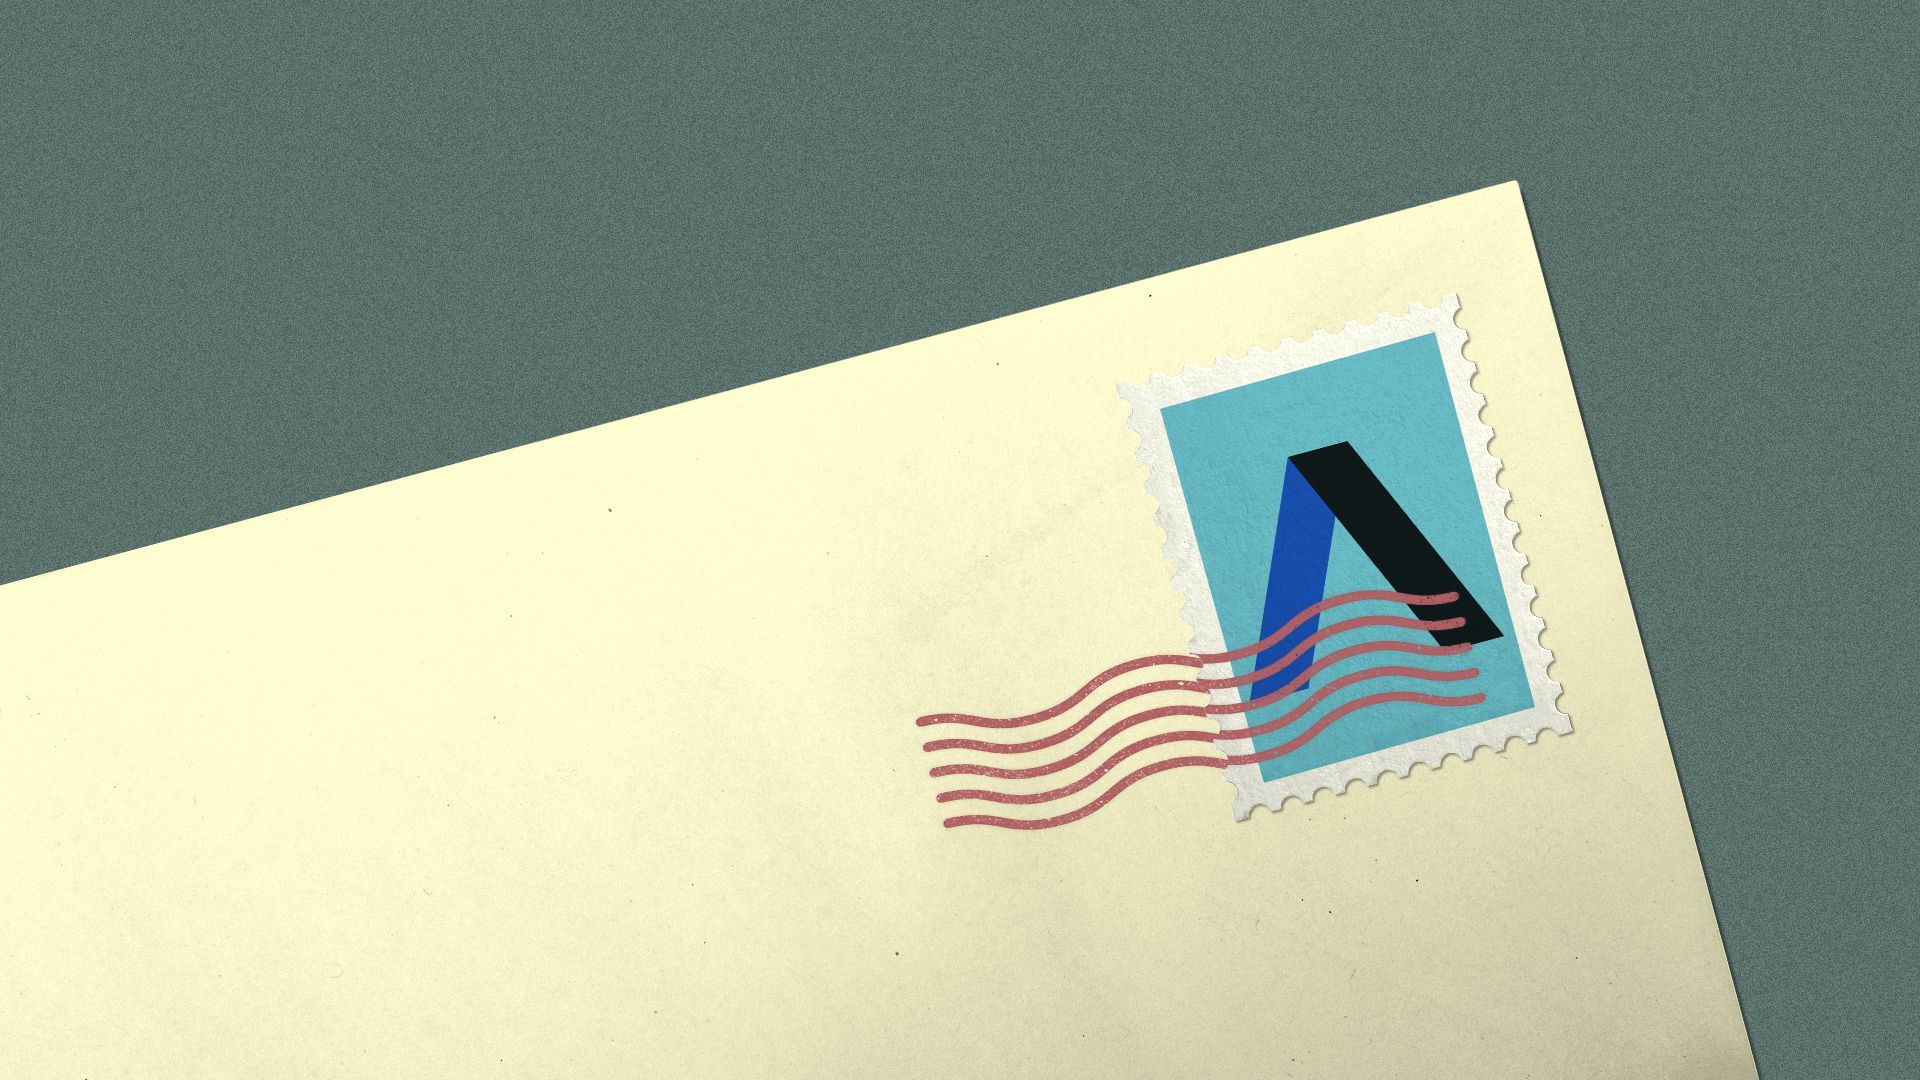 Illustration of a letter with a stamp featuring the Axios logo.